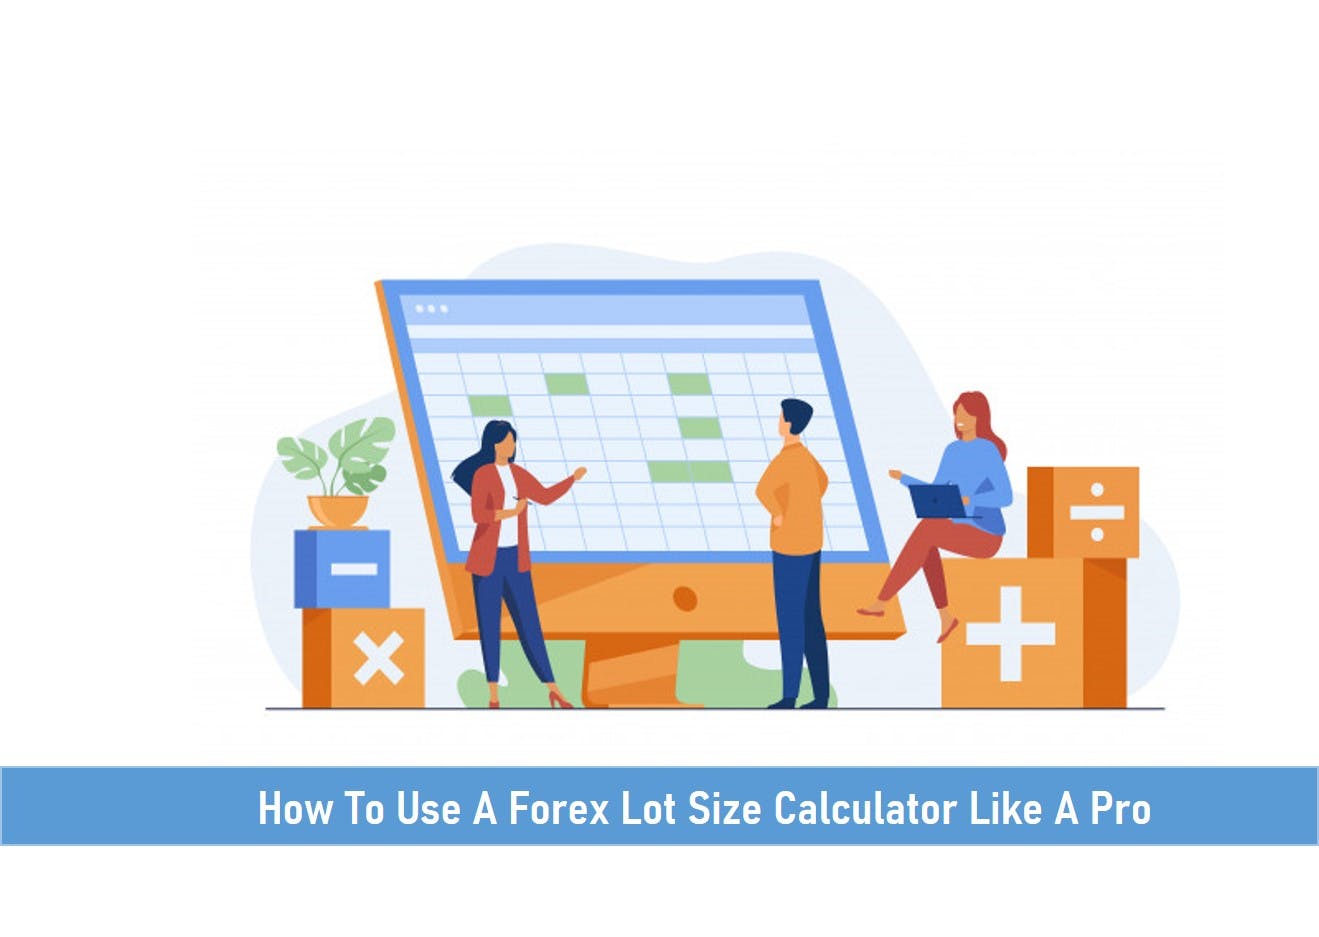 How To Use A Forex Lot Size Calculator Like A Pro